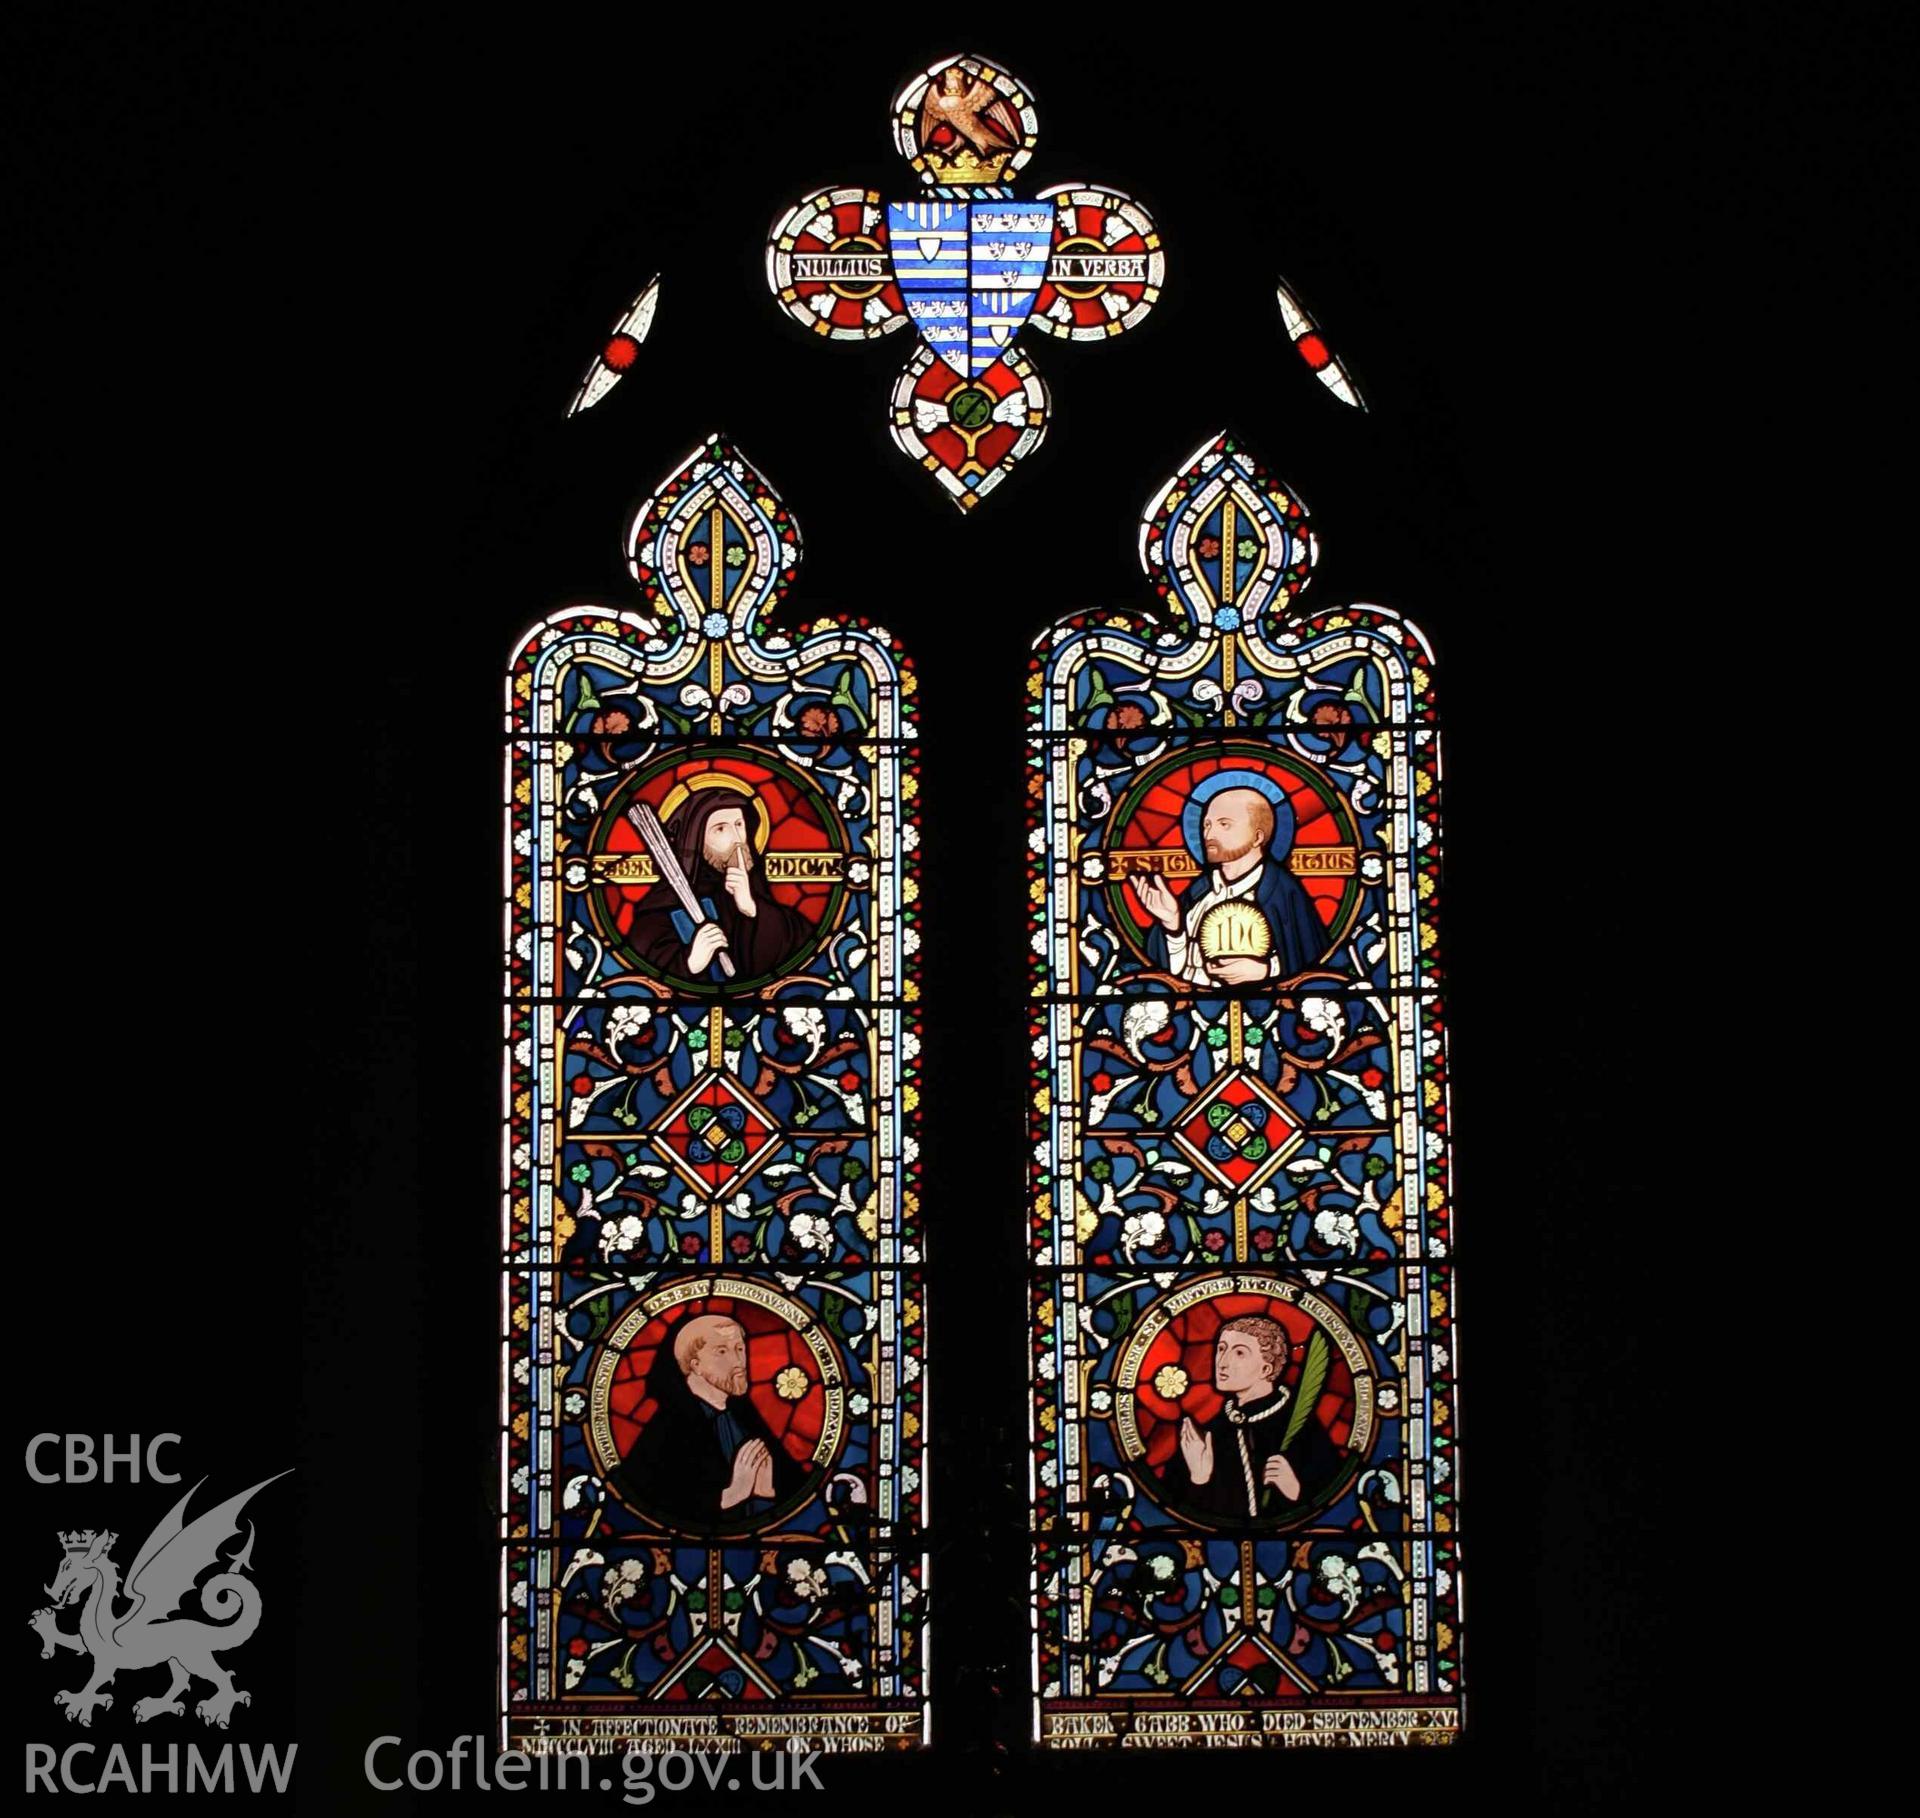 Digital colour photograph showing a stained glass window depicting St Benedict and St Ignatius as well as the Ven. Augustine Baker and St David Lewis (‘Charles Baker’); it is dedicated to John Baker Gabb. The window is in the chantry at Our Lady and St Michael Catholic church, Abergavenny.